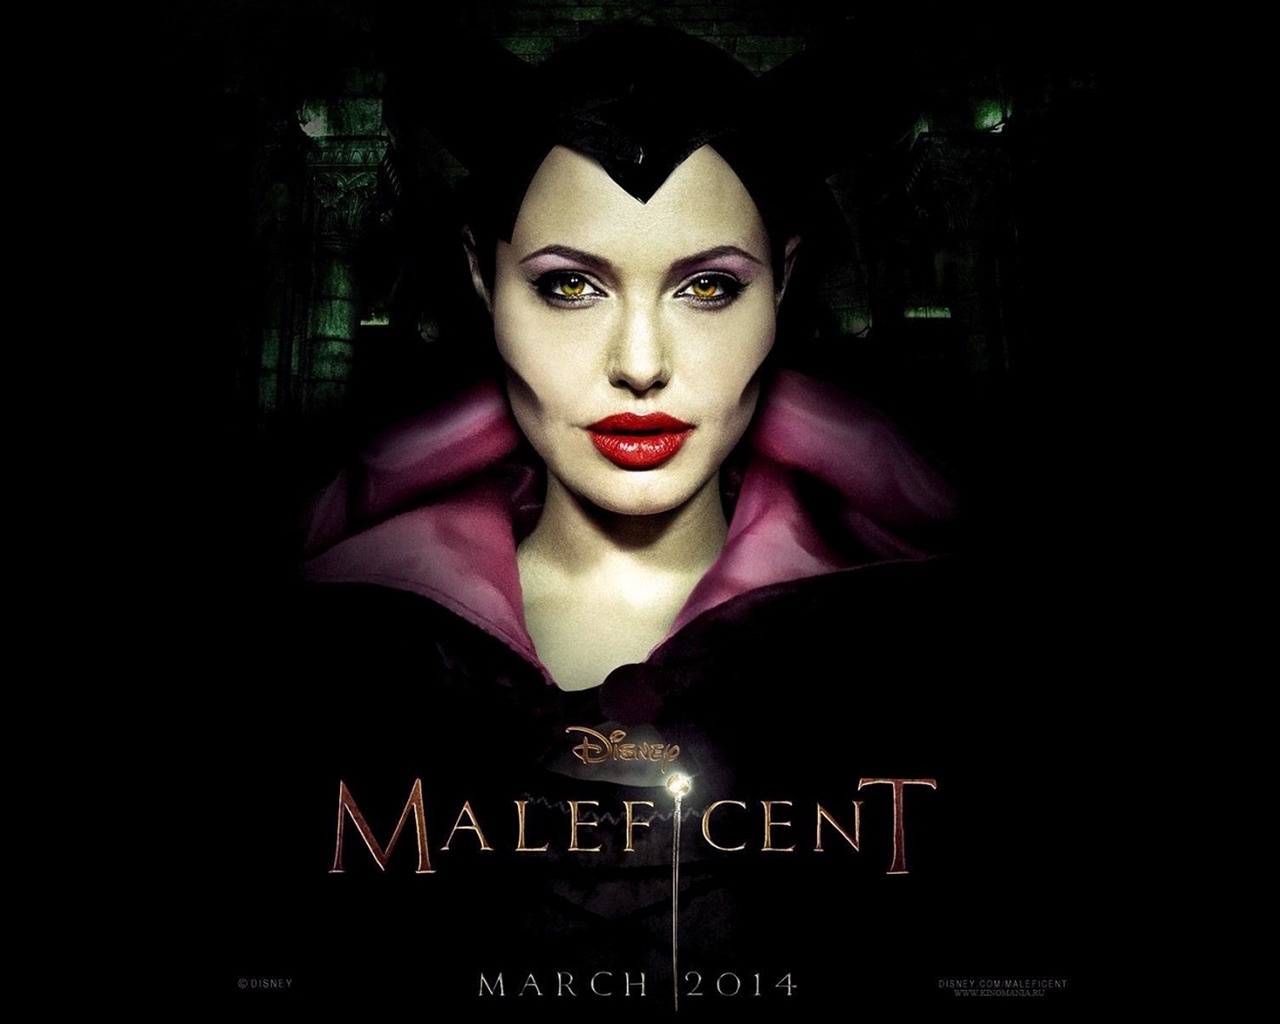 Maleficent for 1280 x 1024 resolution